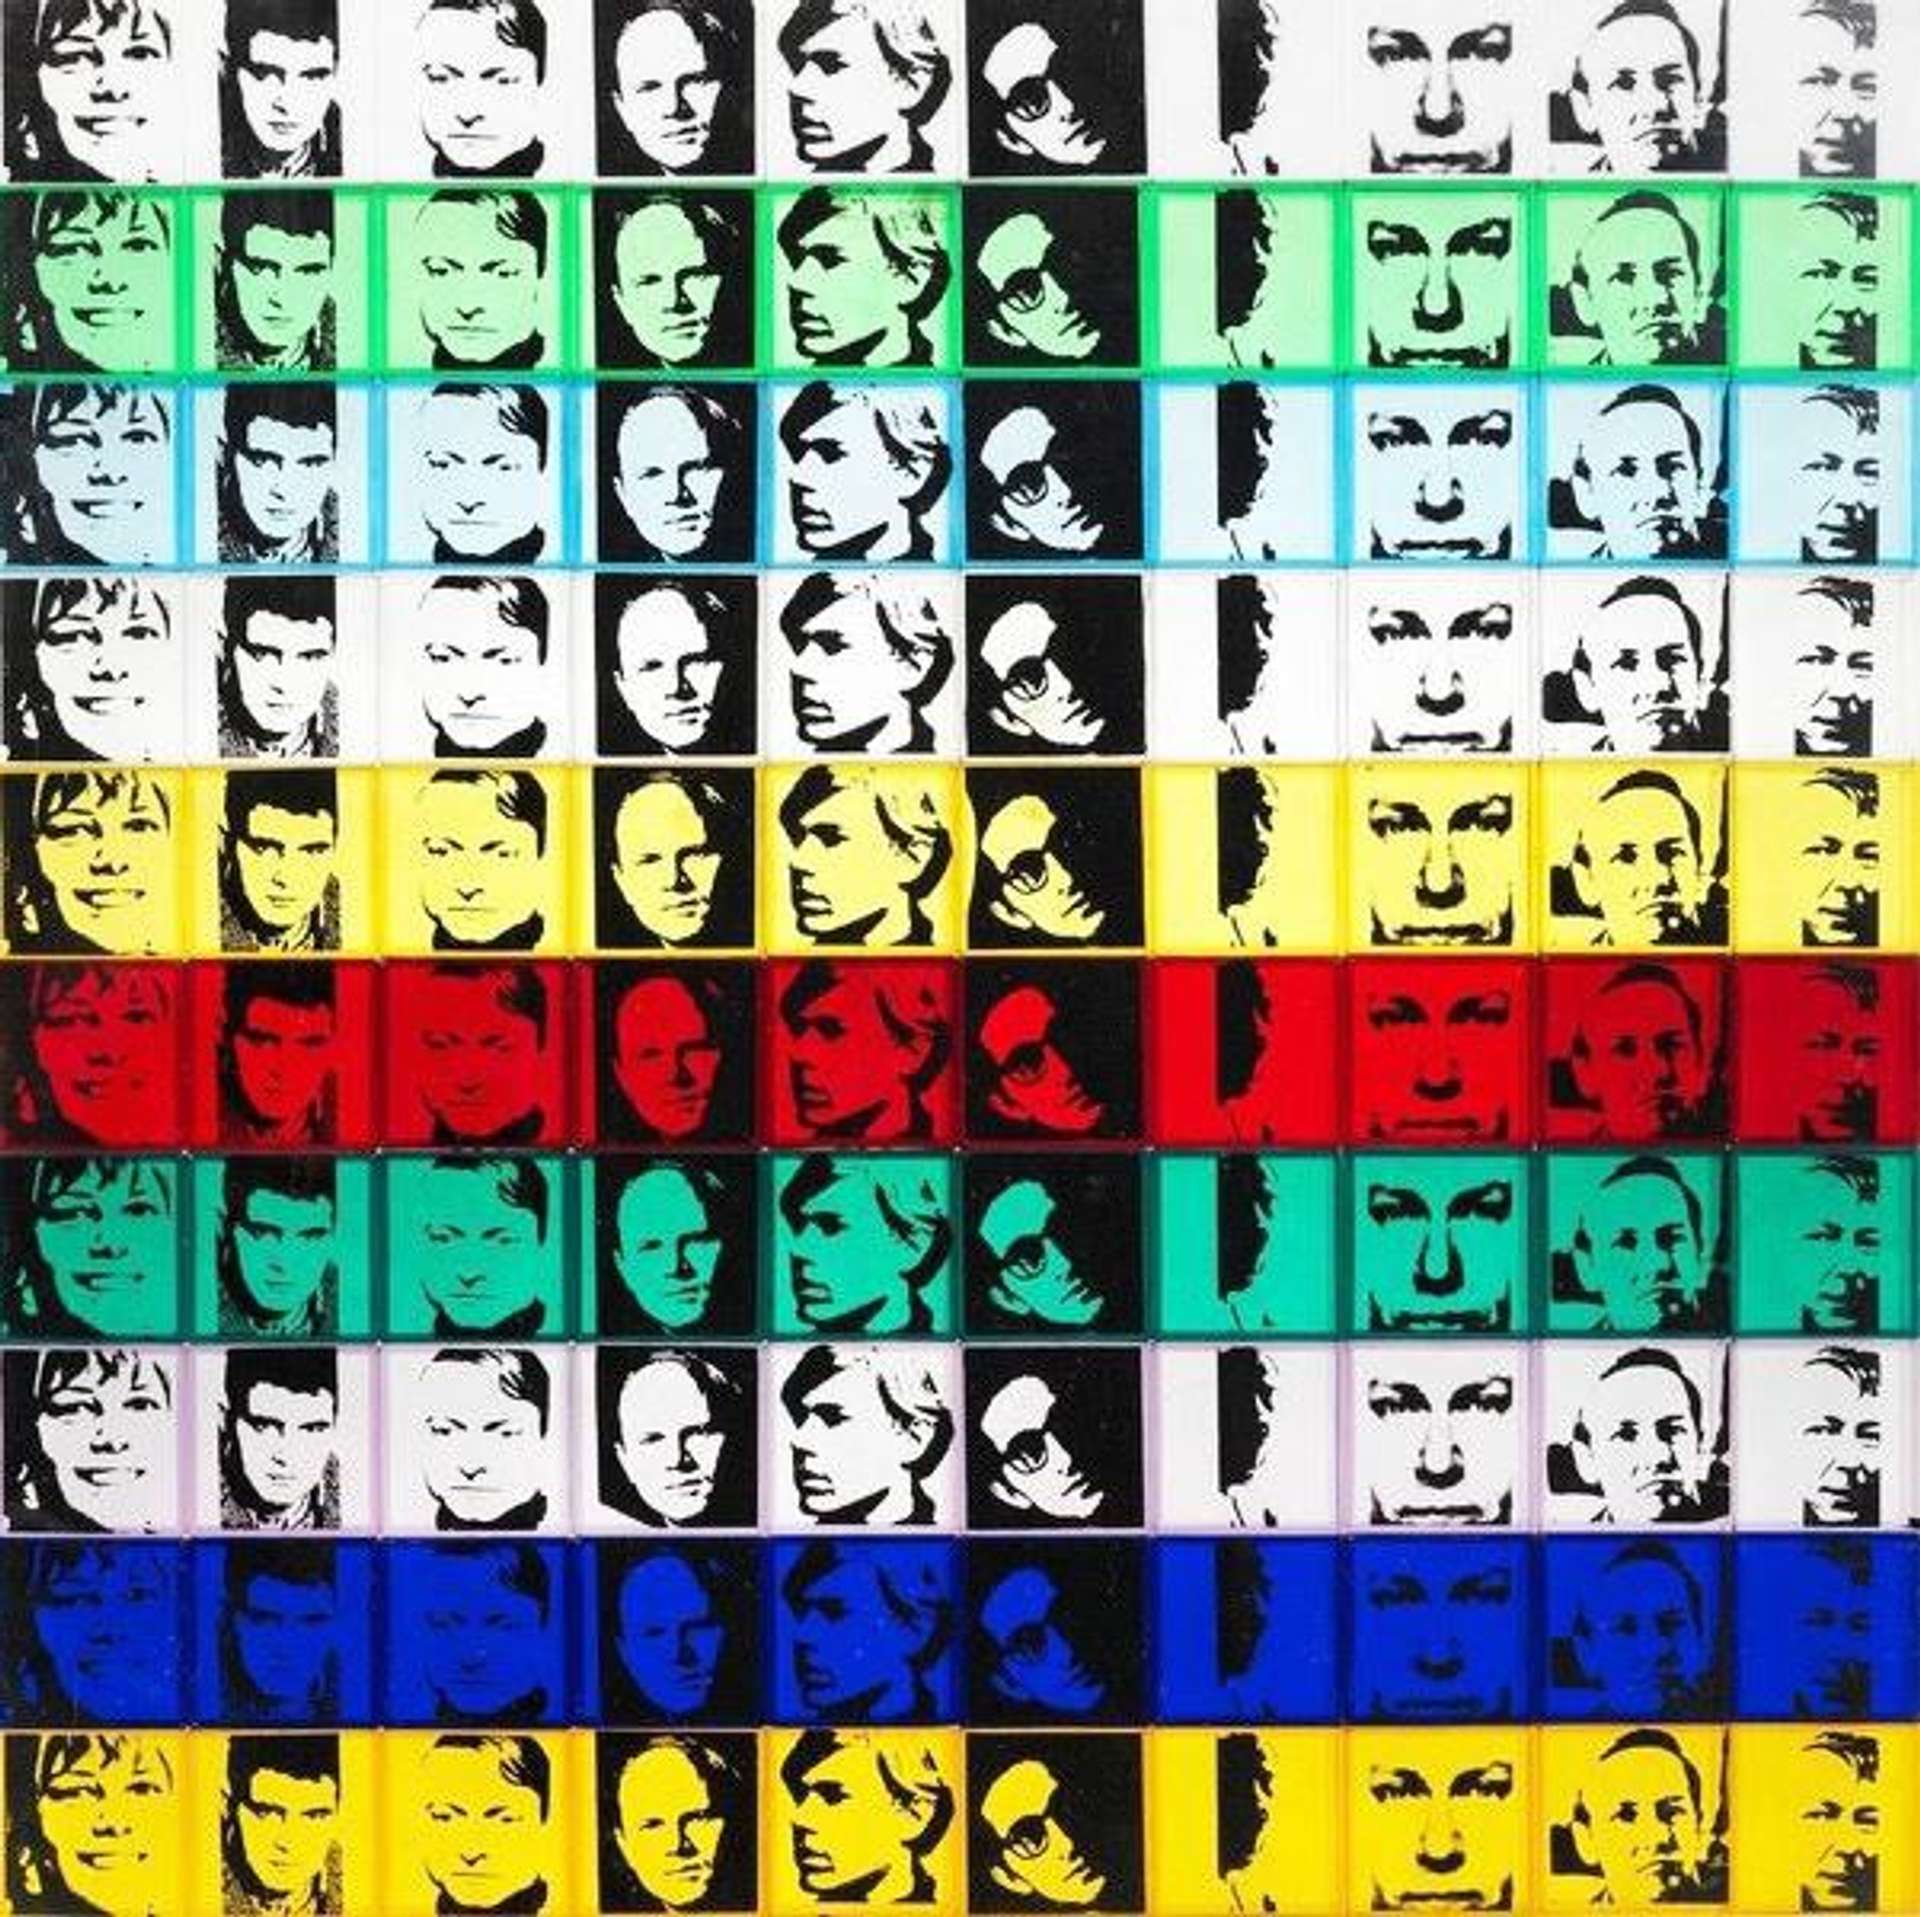 Portraits Of The Artists (F. & S. II.17) - Signed Print by Andy Warhol 1967 - MyArtBroker